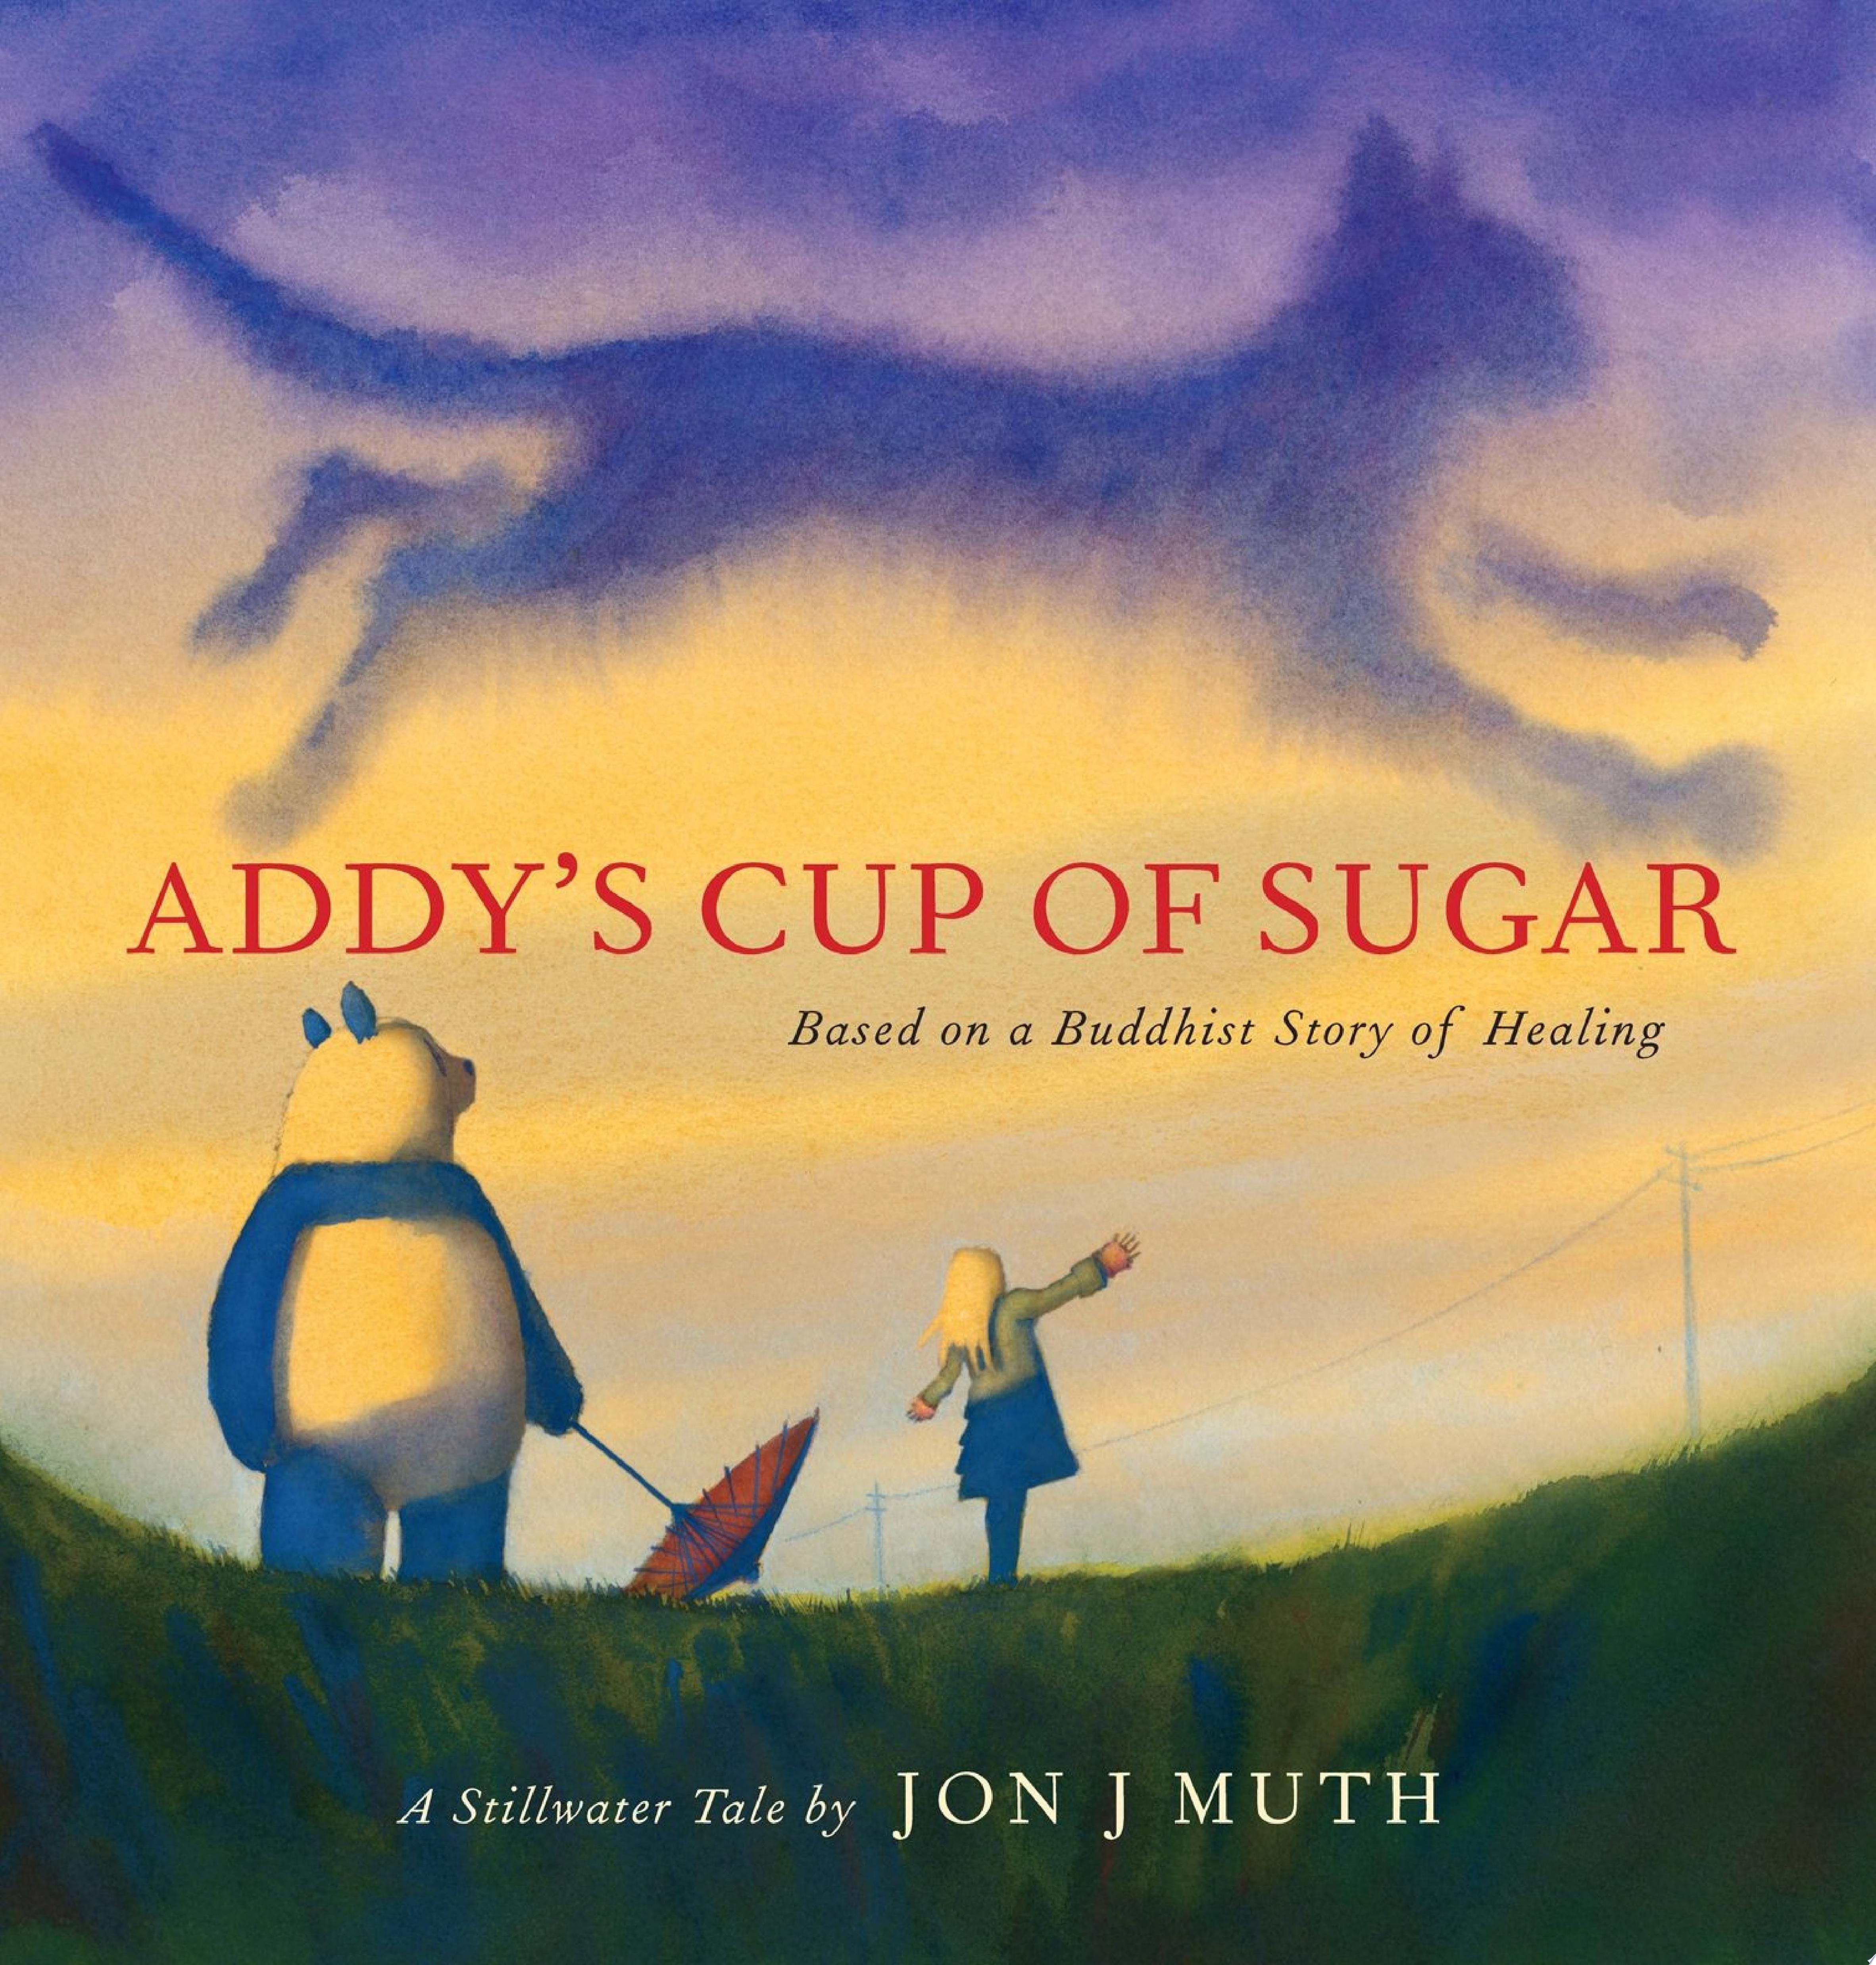 Image for "Addy's Cup of Sugar"